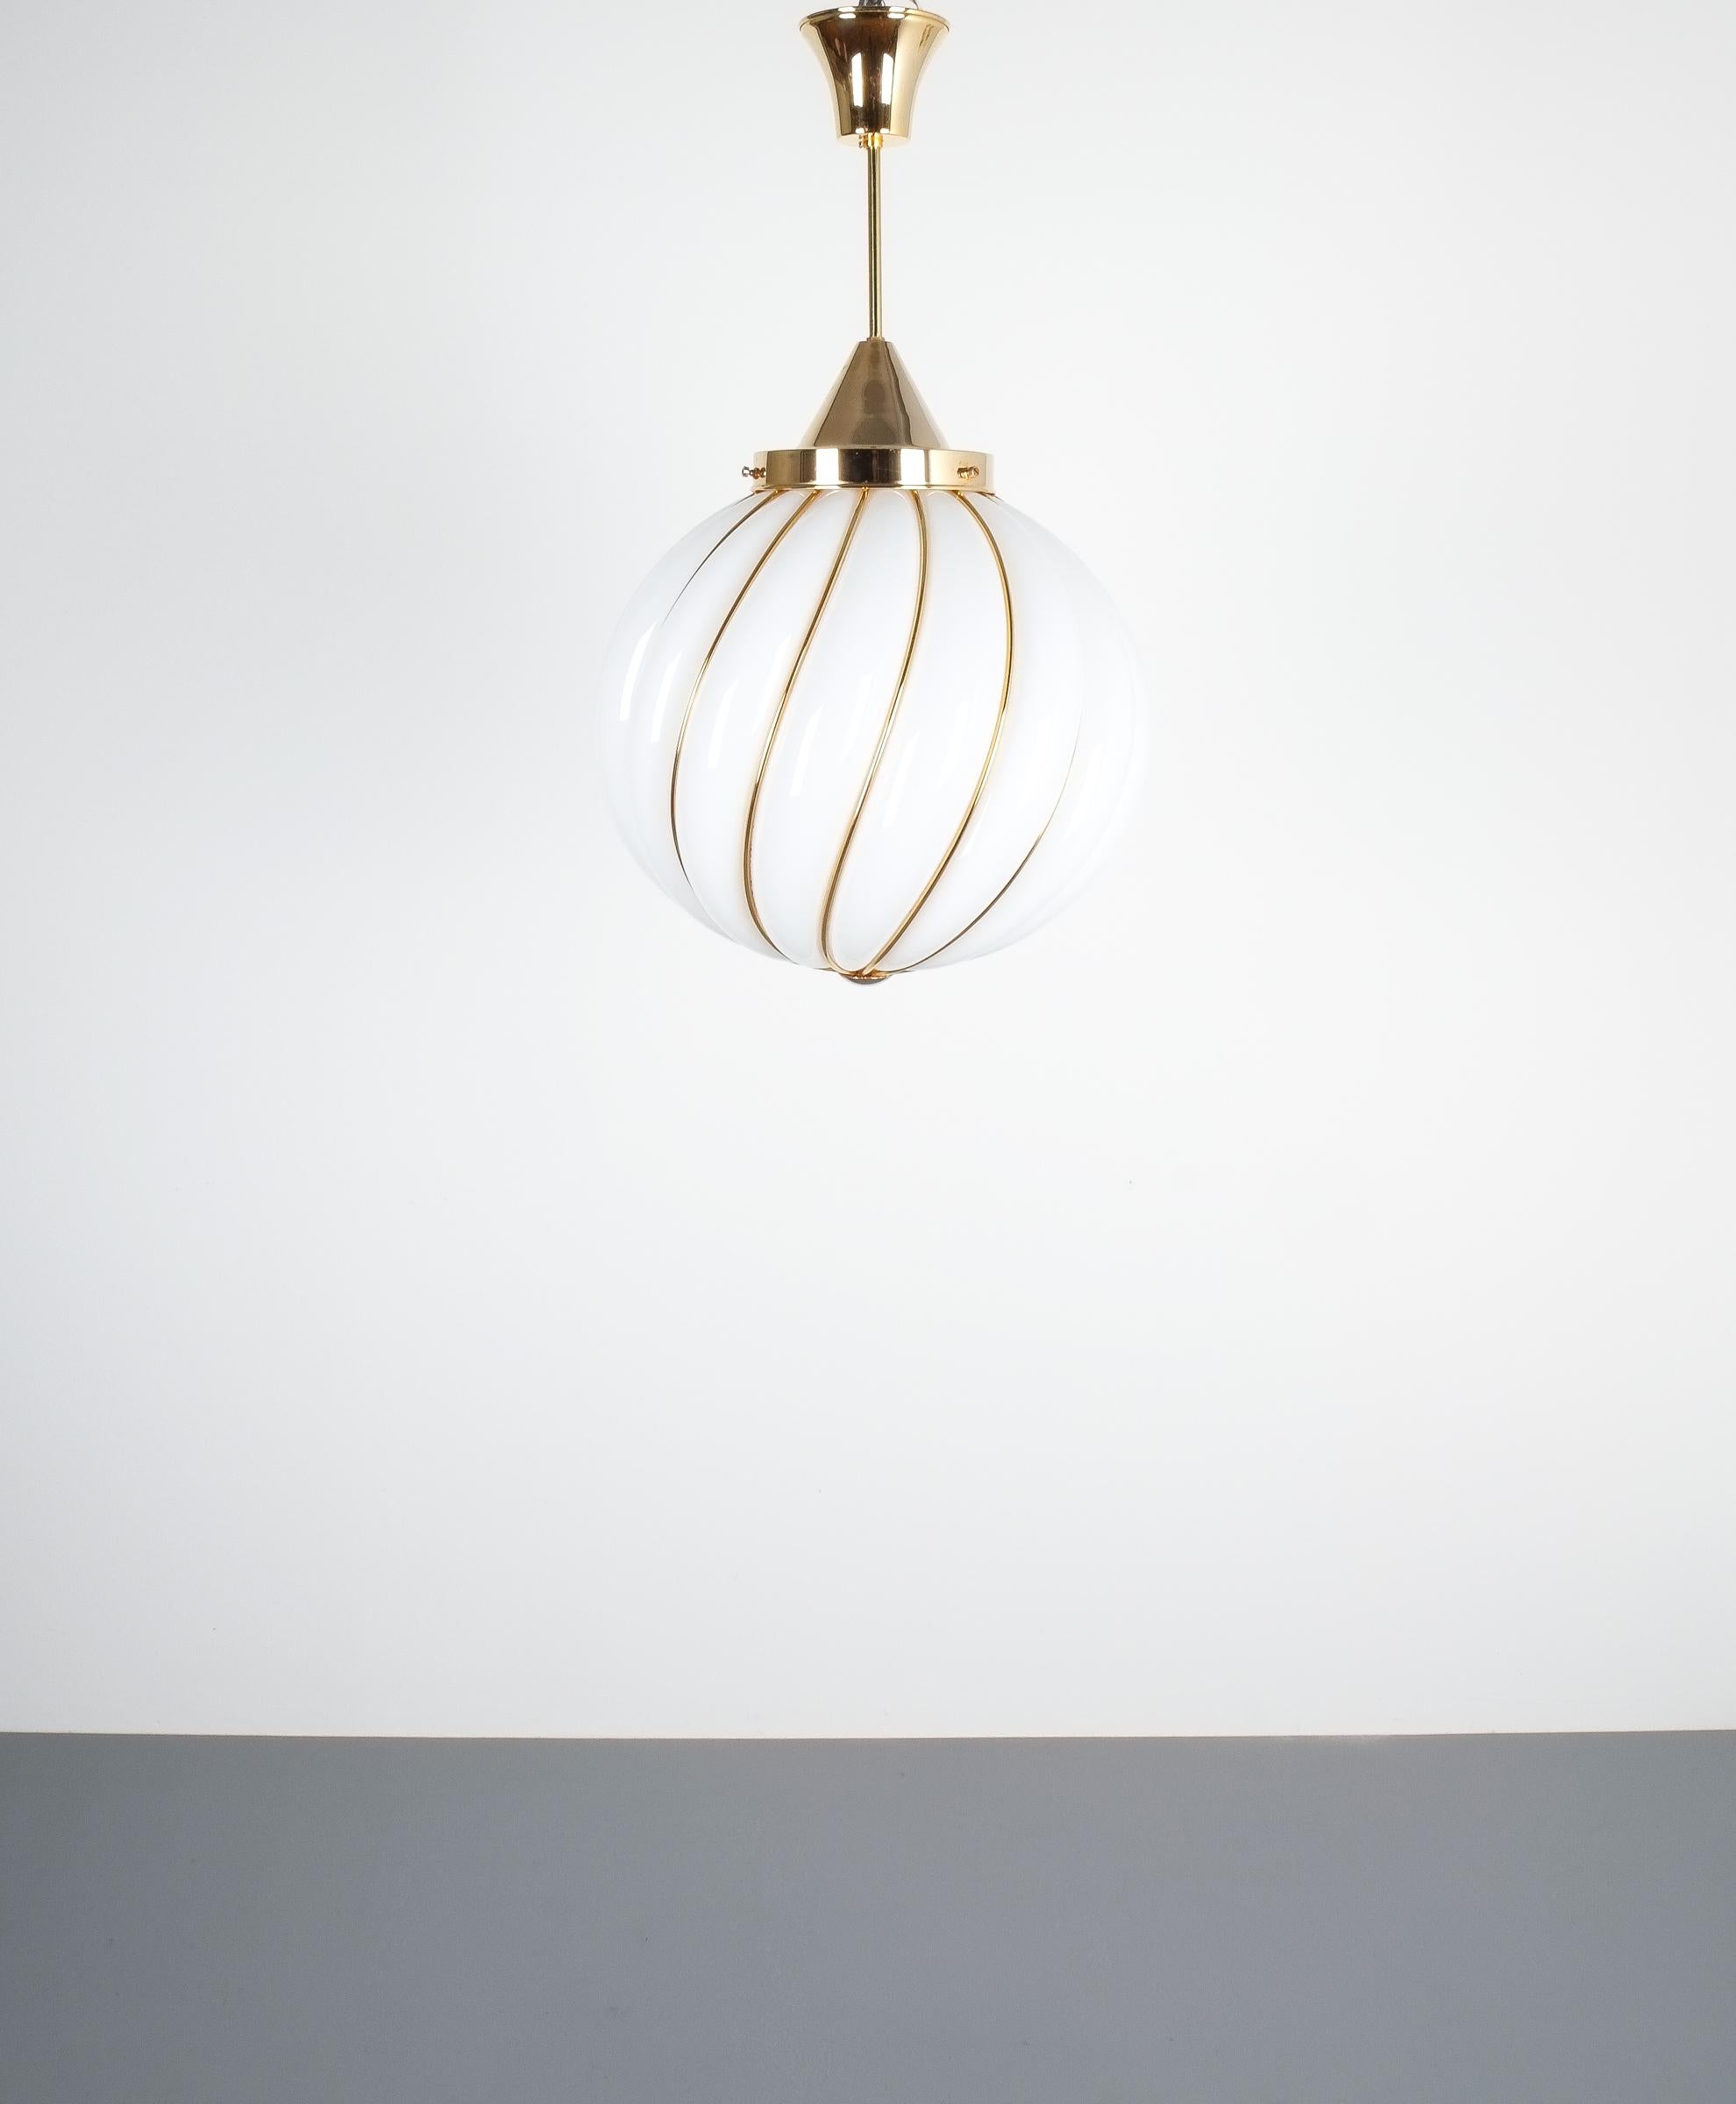 One of three Adolf Loos pendant lamps for VeArt Opal glass gold, circa 1960-1970- Three pieces available, priced per piece

Rare Reedition of the original design by Adolf Loos by VeArt, Italy. Large 16.5